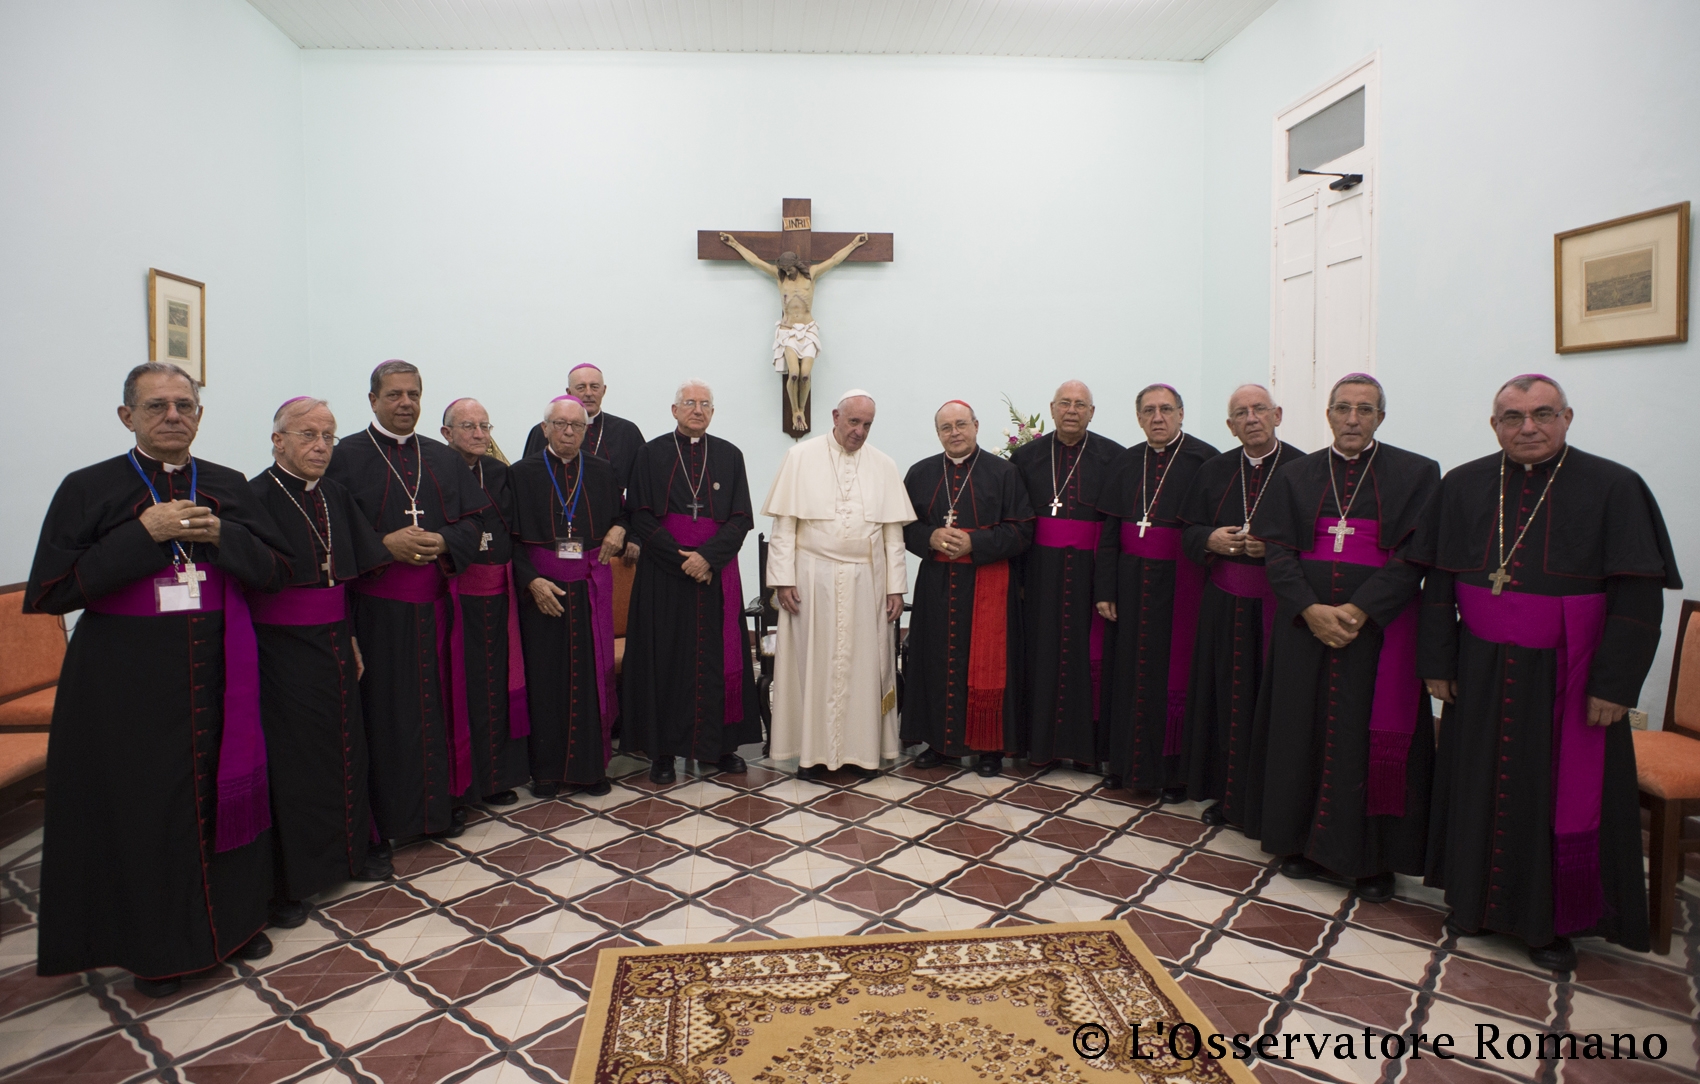 Pope Francis' meeting with bishops of Cuba at the seminary of St. Basil the Great in El Cobre. 21st of September 2015